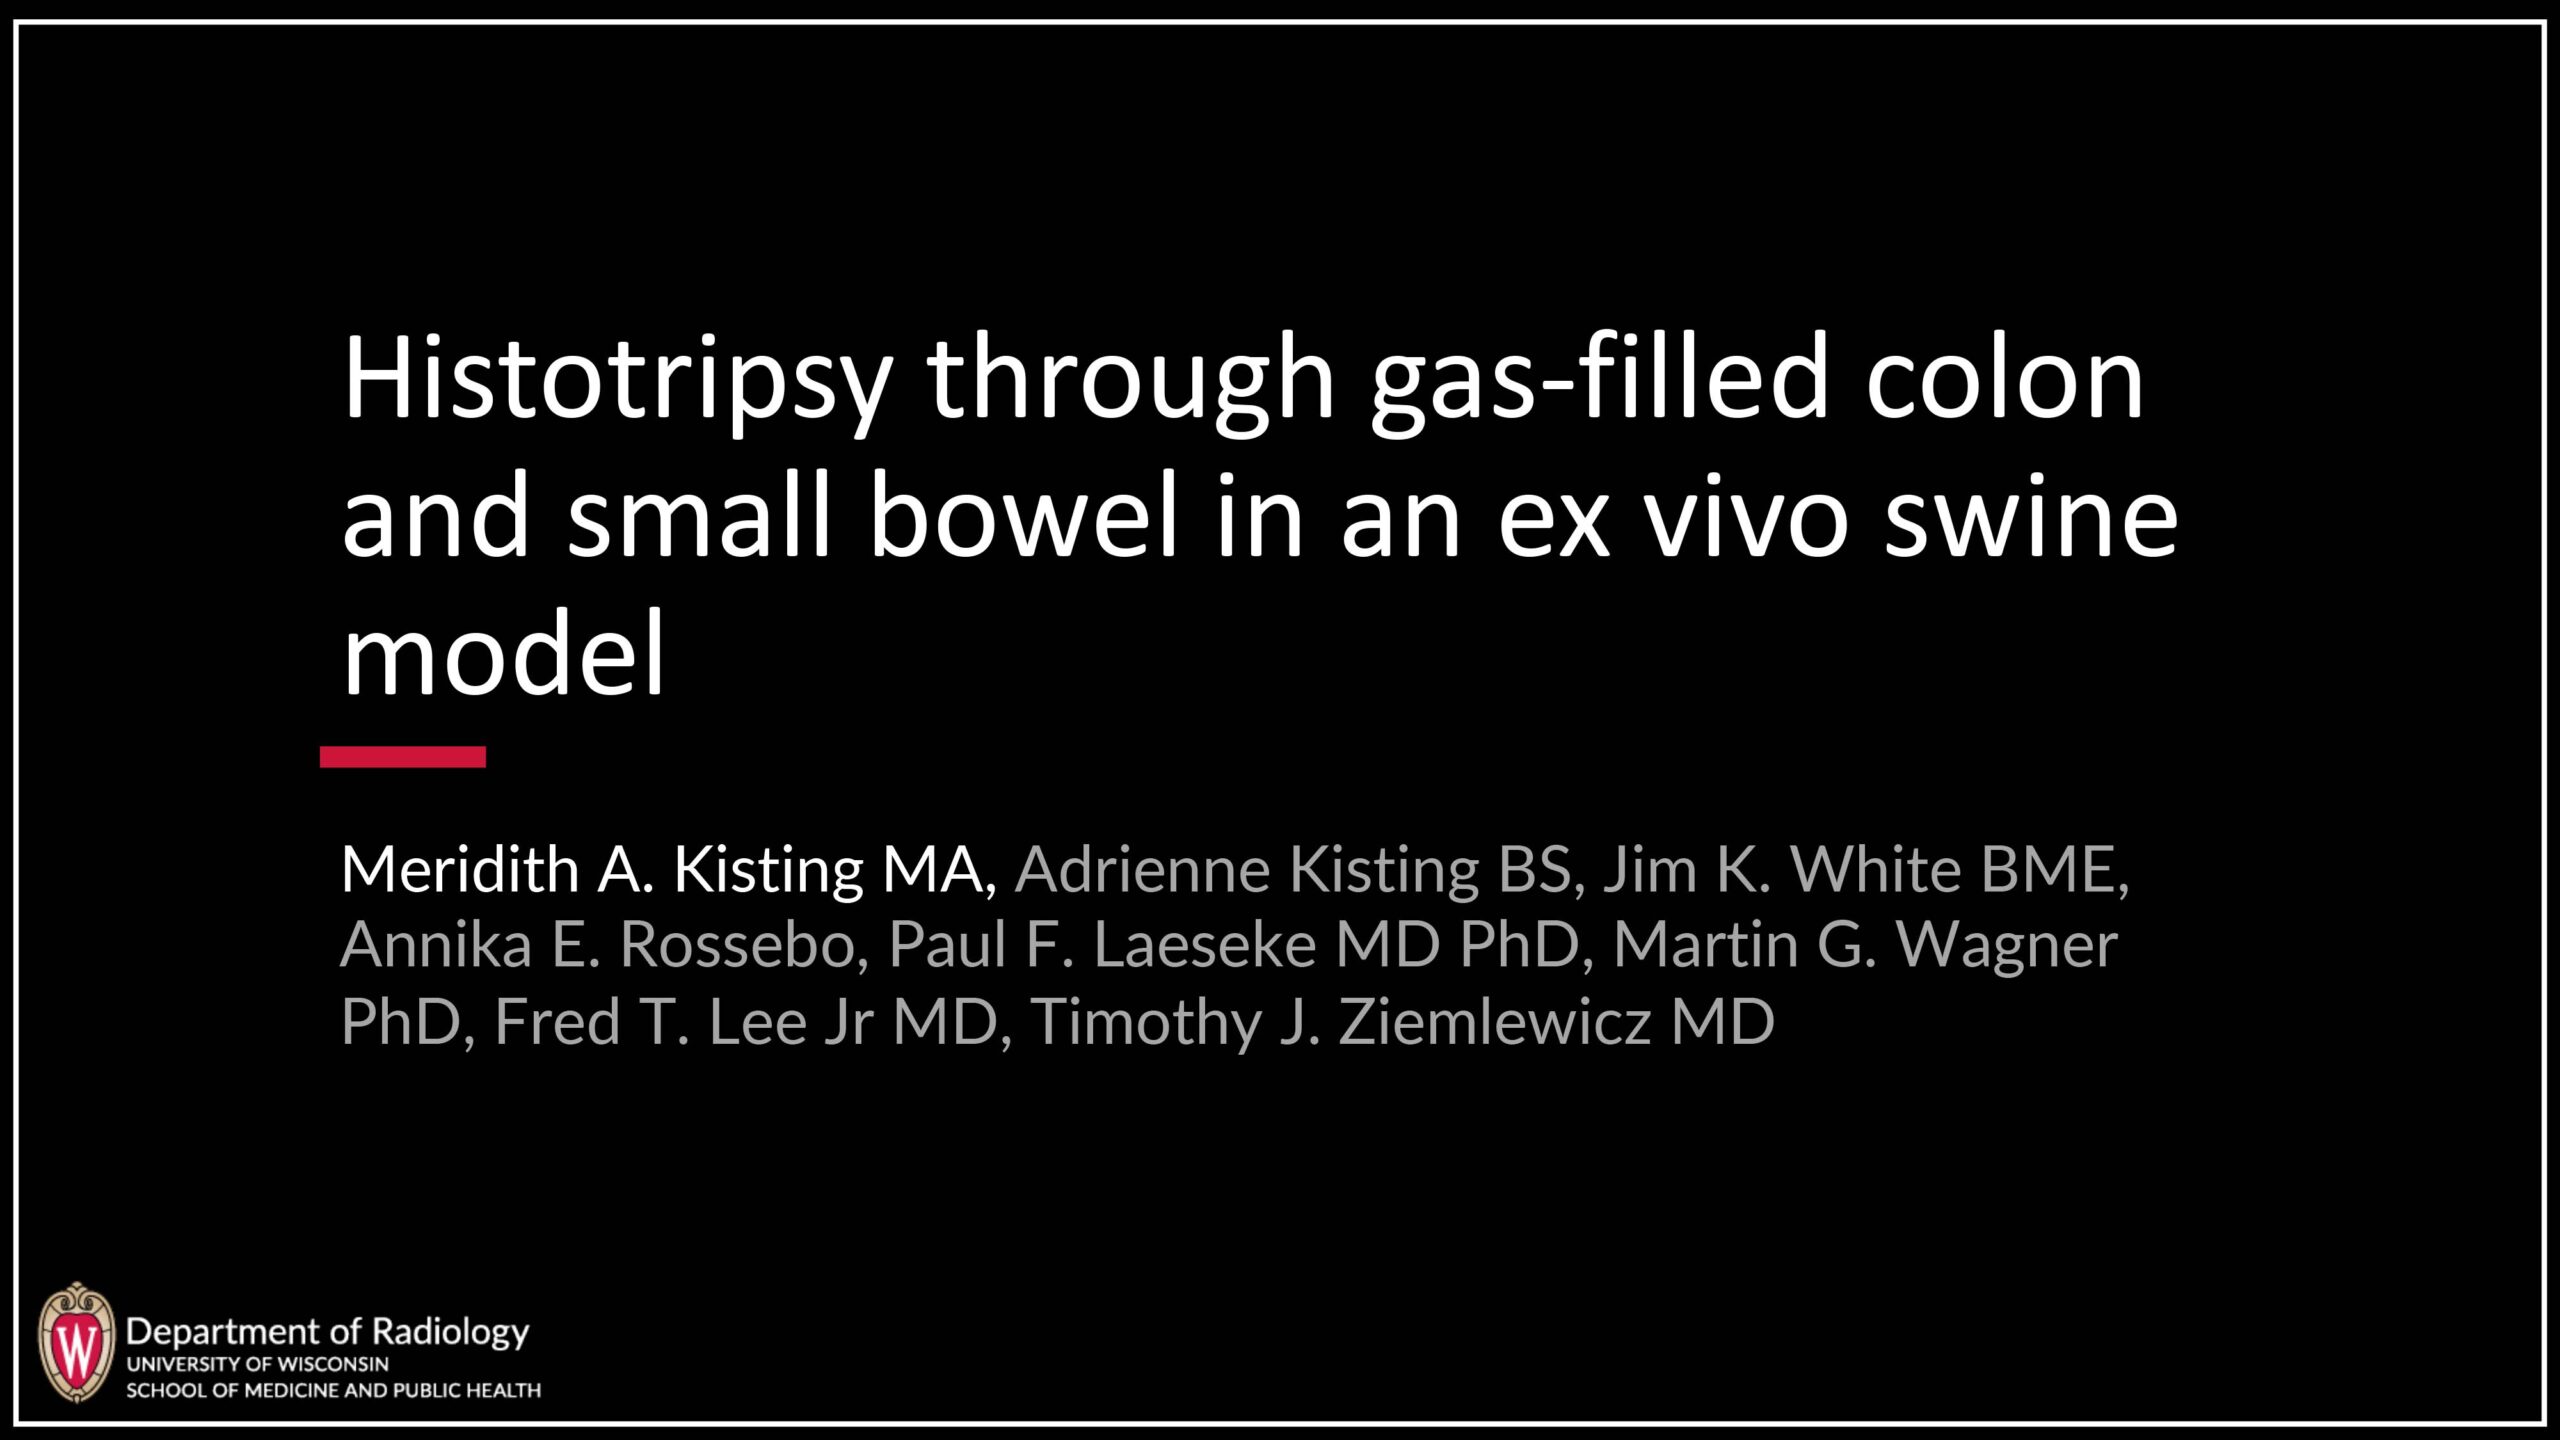 Histotripsy Through Gas-Filled Colon and Small Bowel in an Ex Vivo Swine Model